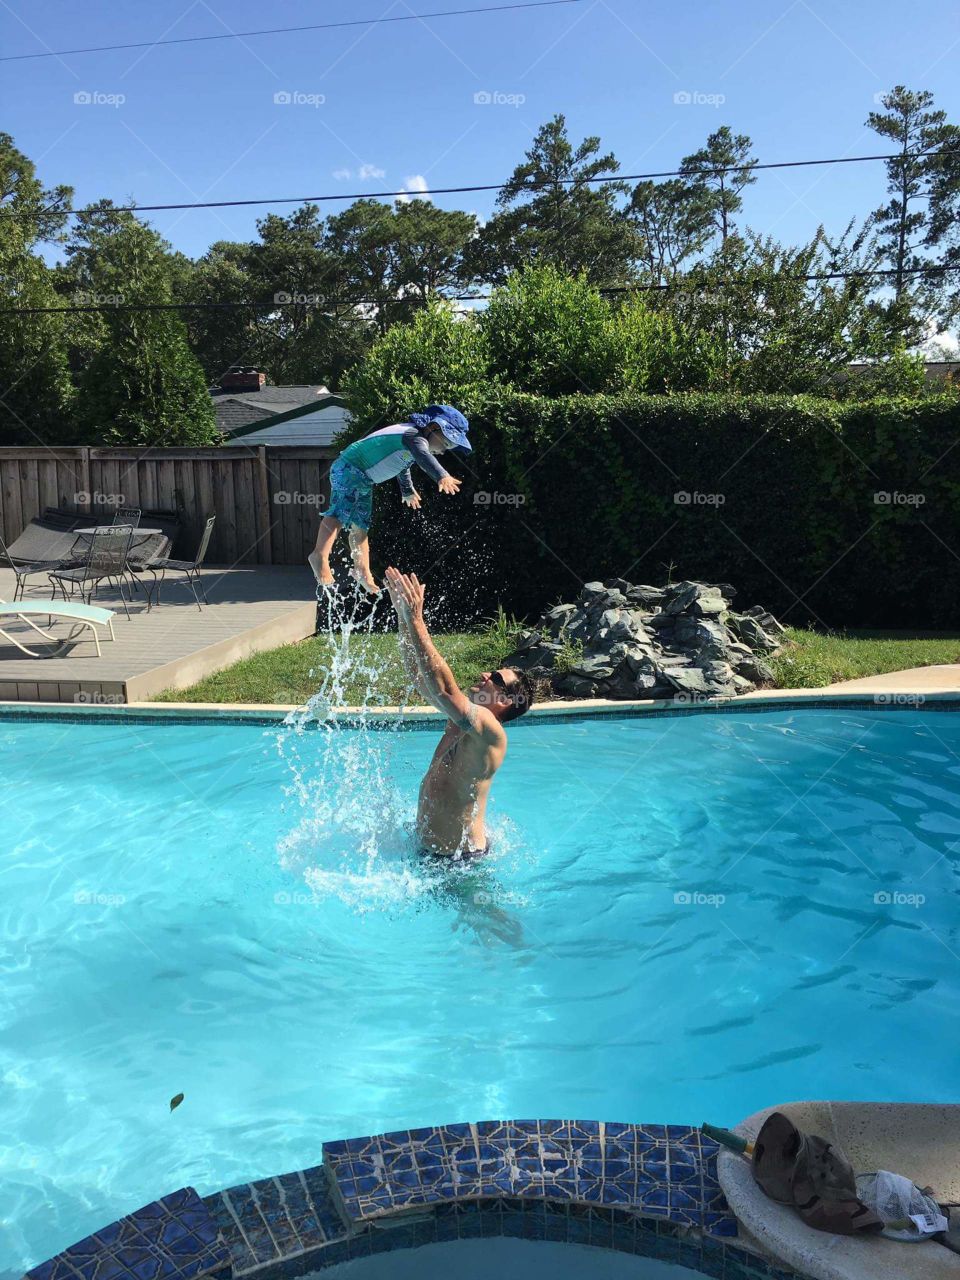 My sweet husband (aka Duncle) playing with our nephew on a gorgeous hot summertime day in Columbia, SC. Pool days are the best with family. 